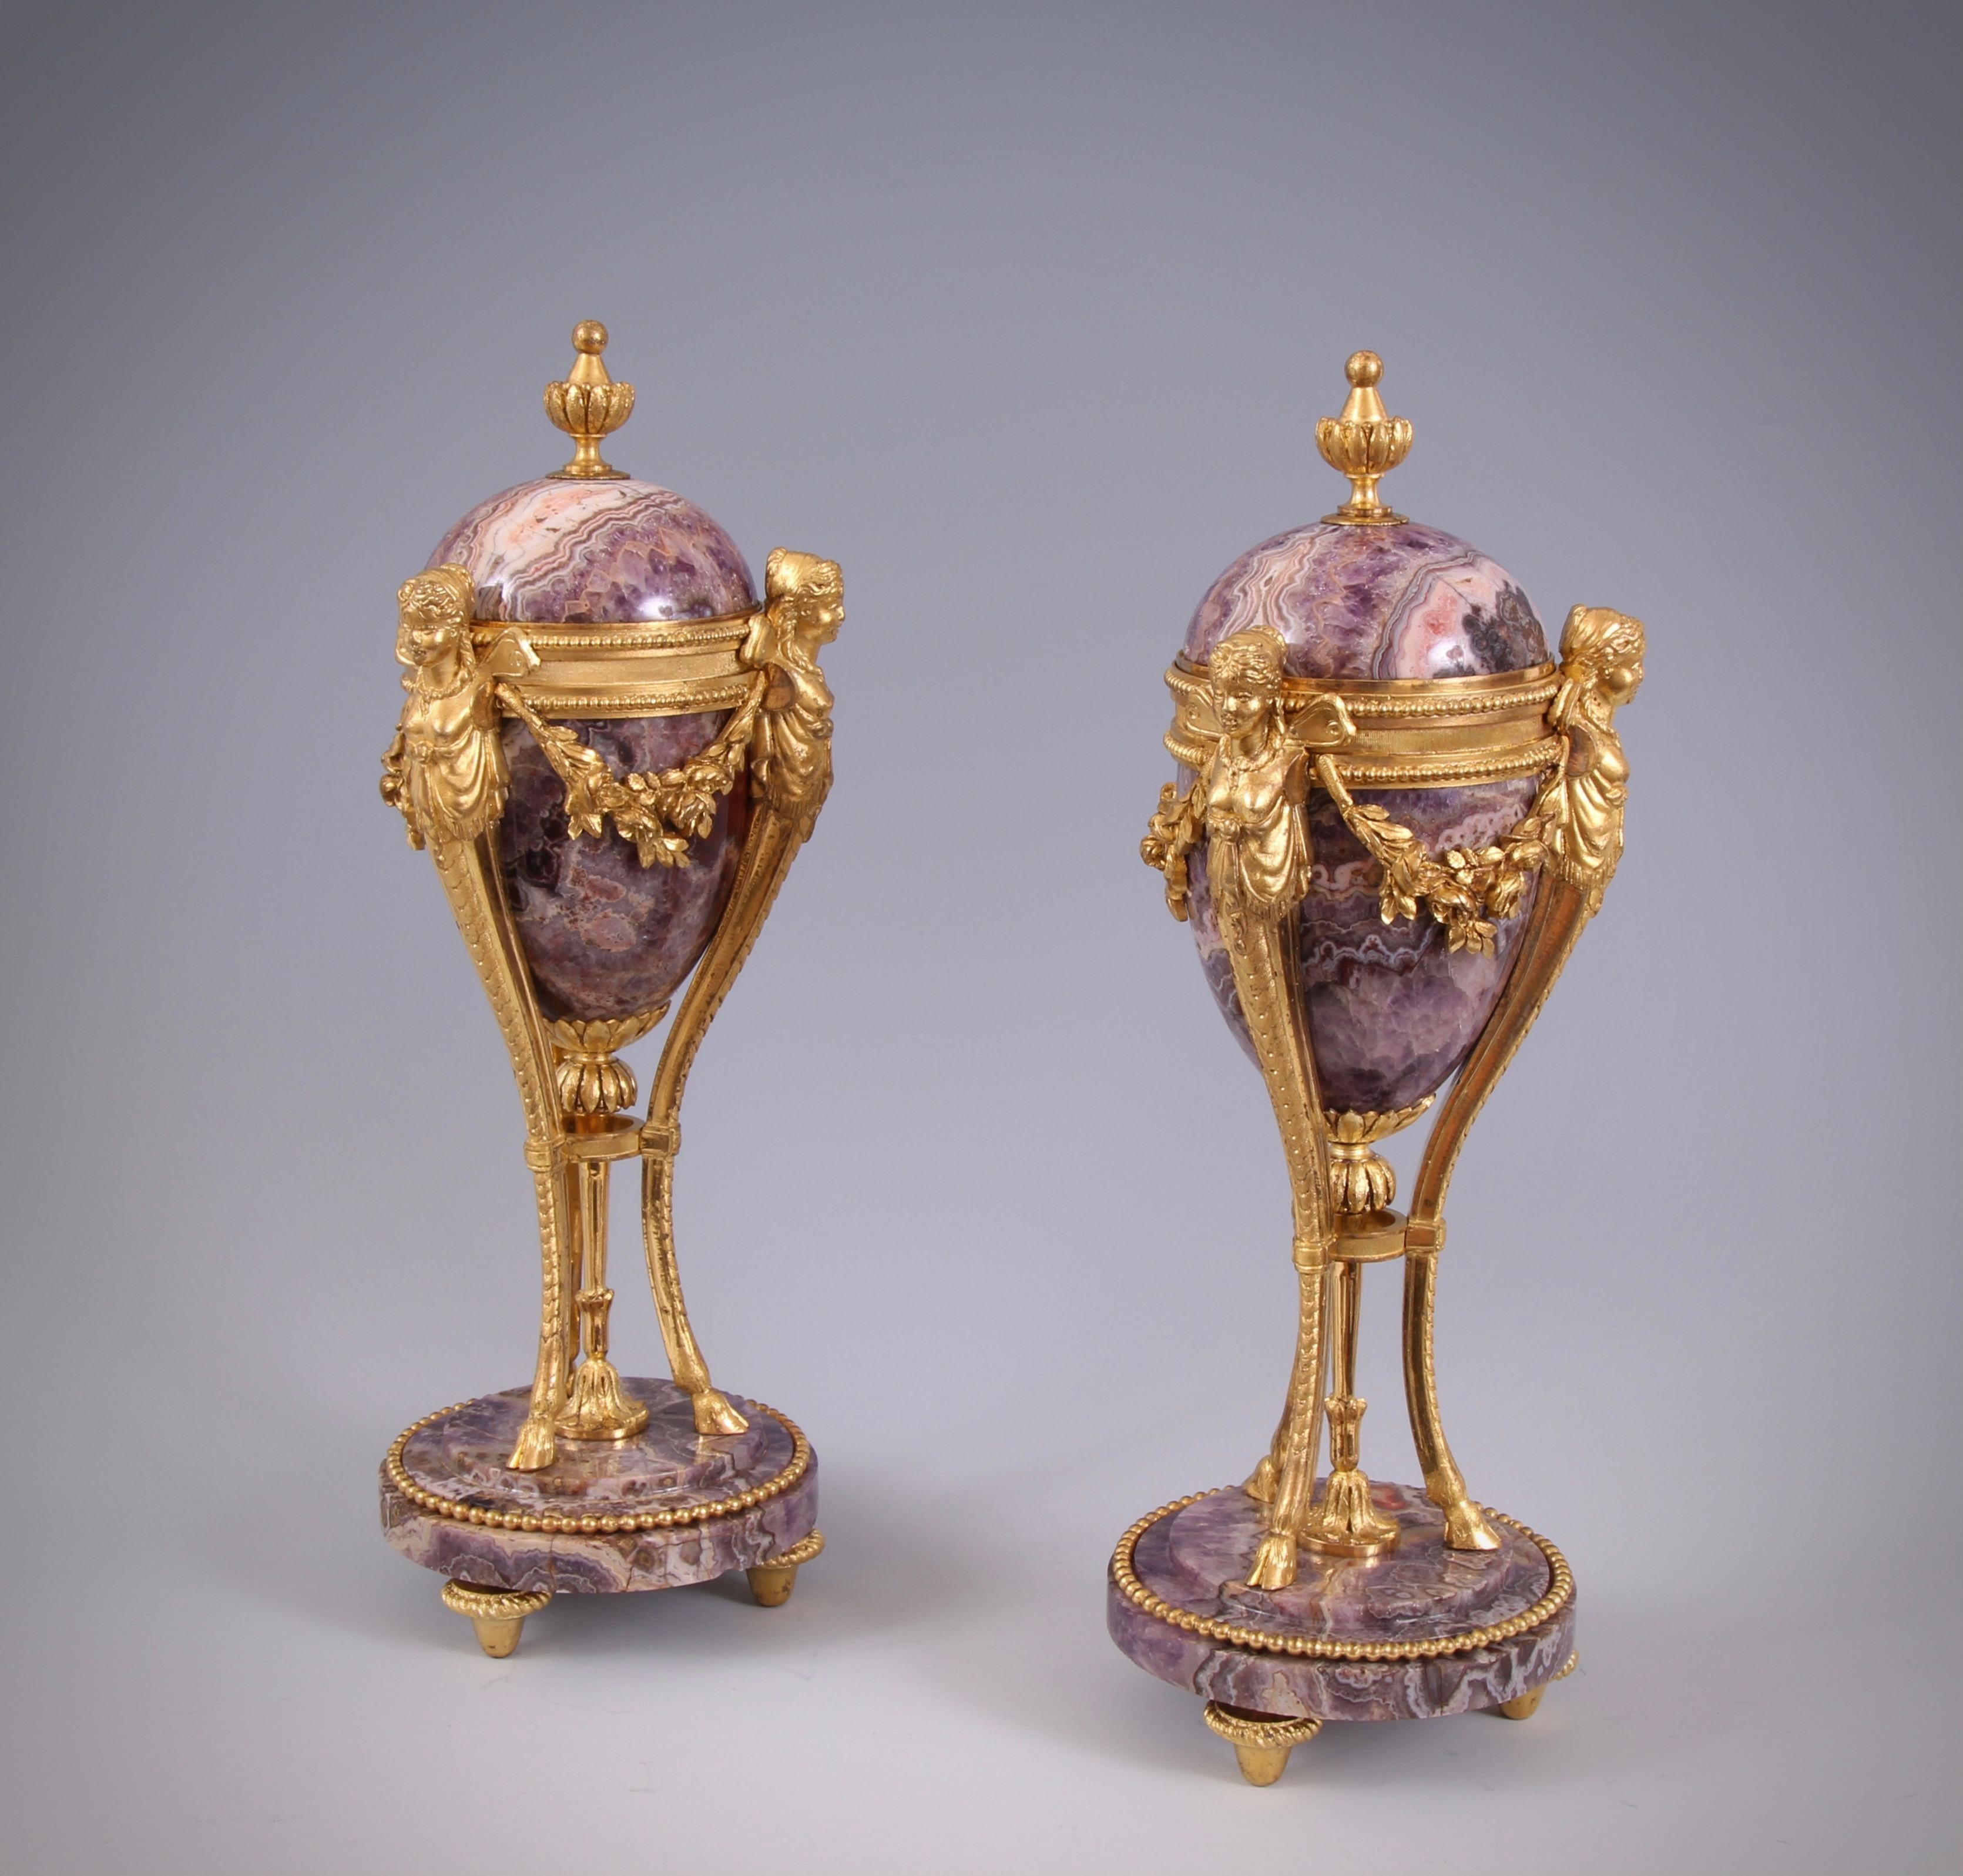 Pair of Louis XVI Amethyst and Gilt Bronze Cassolettes In Good Condition In London, by appointment only